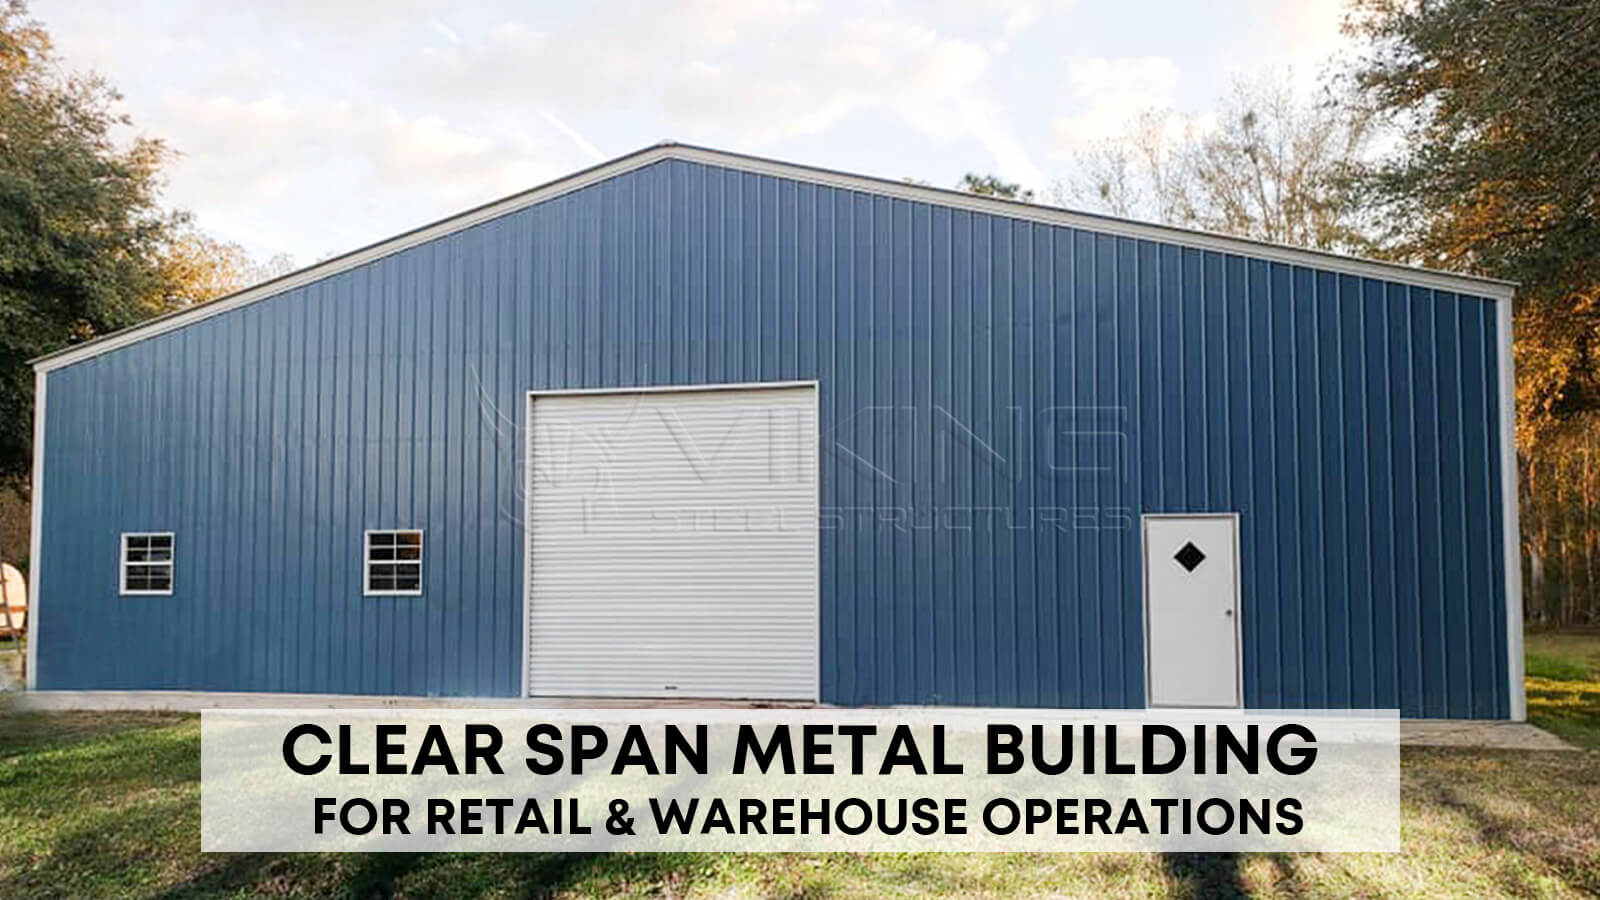 Clear Span Metal Building for Retail & Warehouse Operations